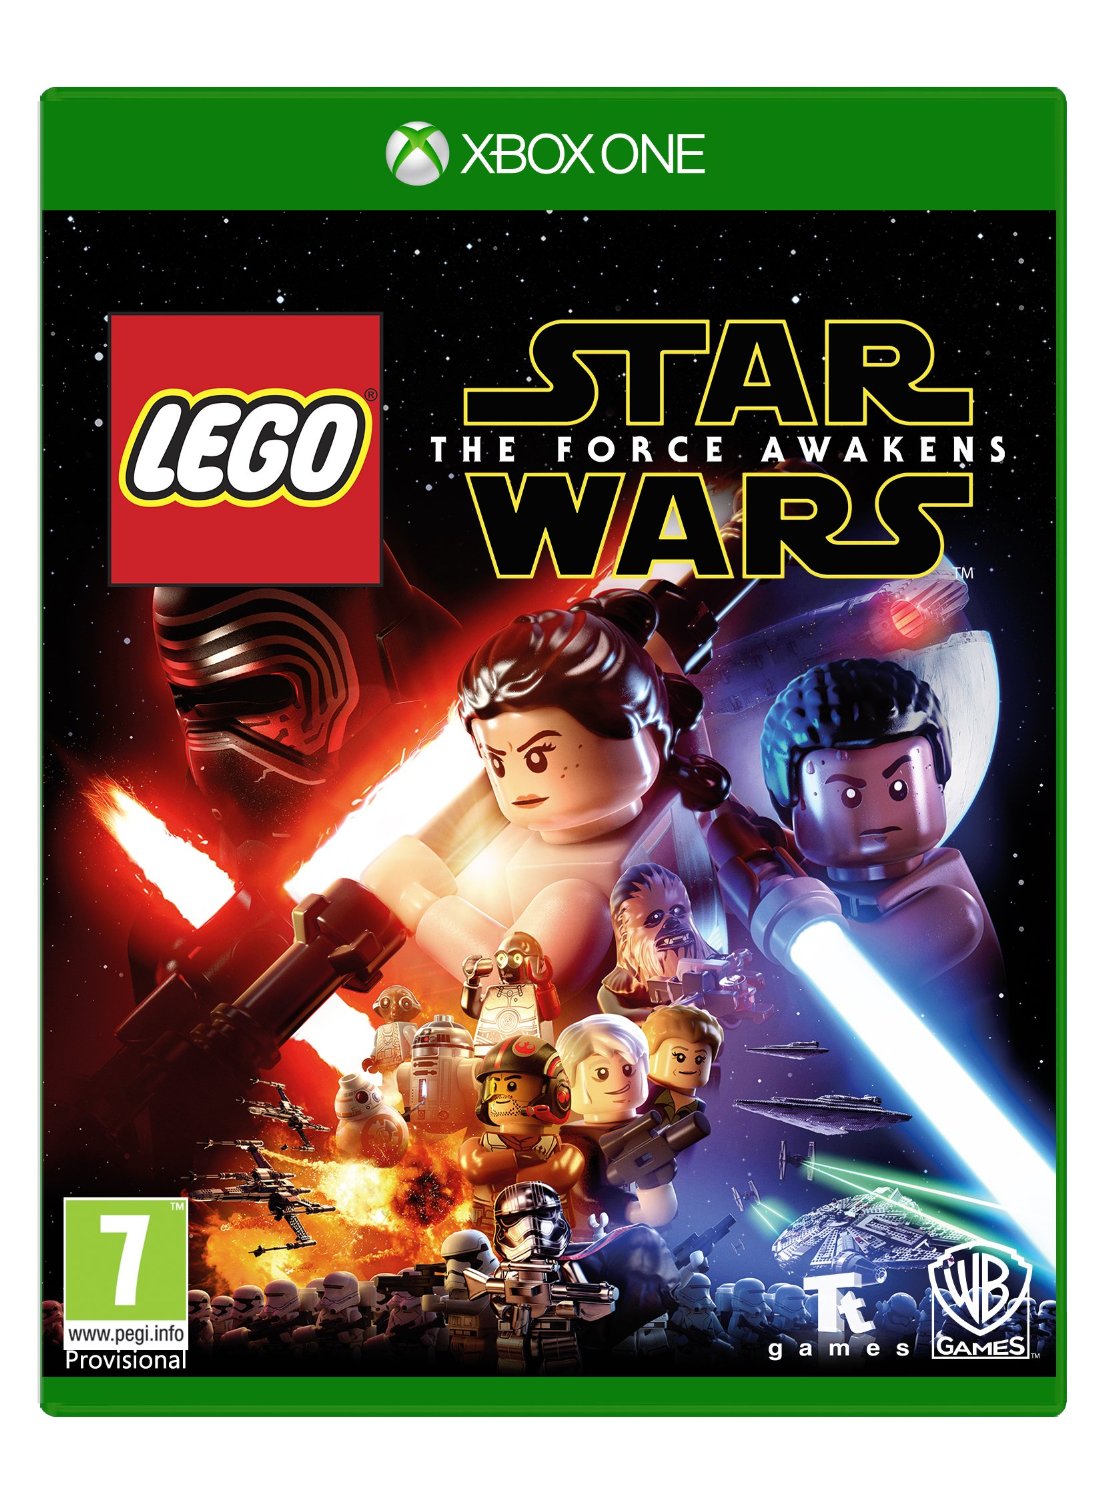 Lego Star Wars The Force Awakens review